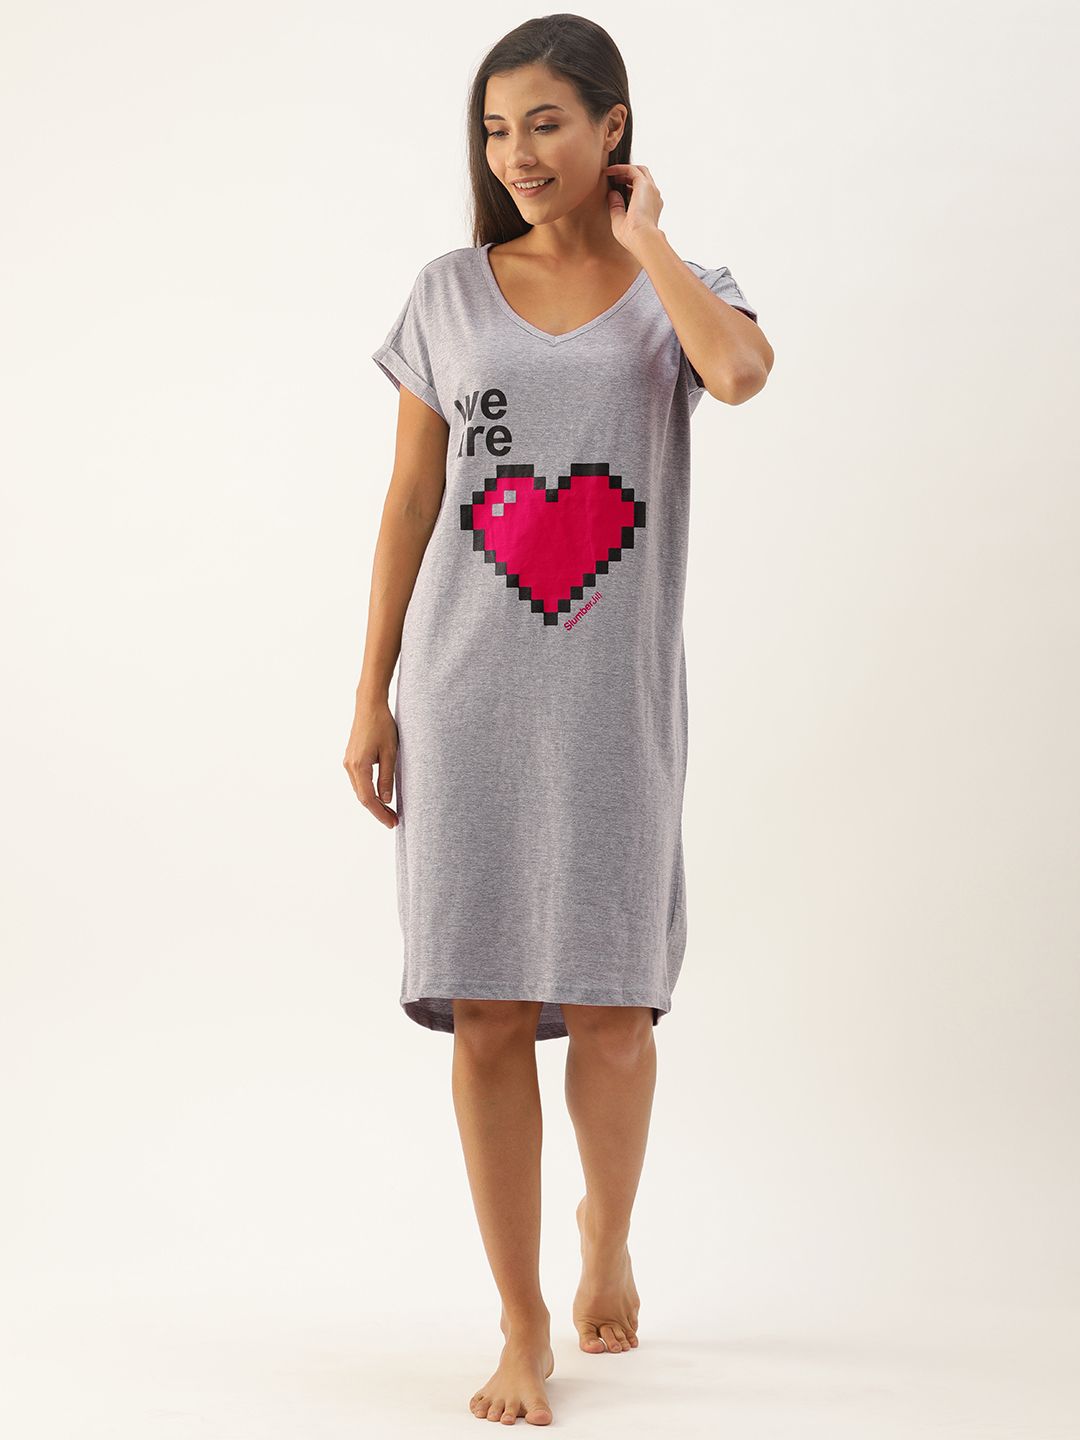 Loose Fit "We are Heart" Sleep Shirt - Colour Grey Mel.